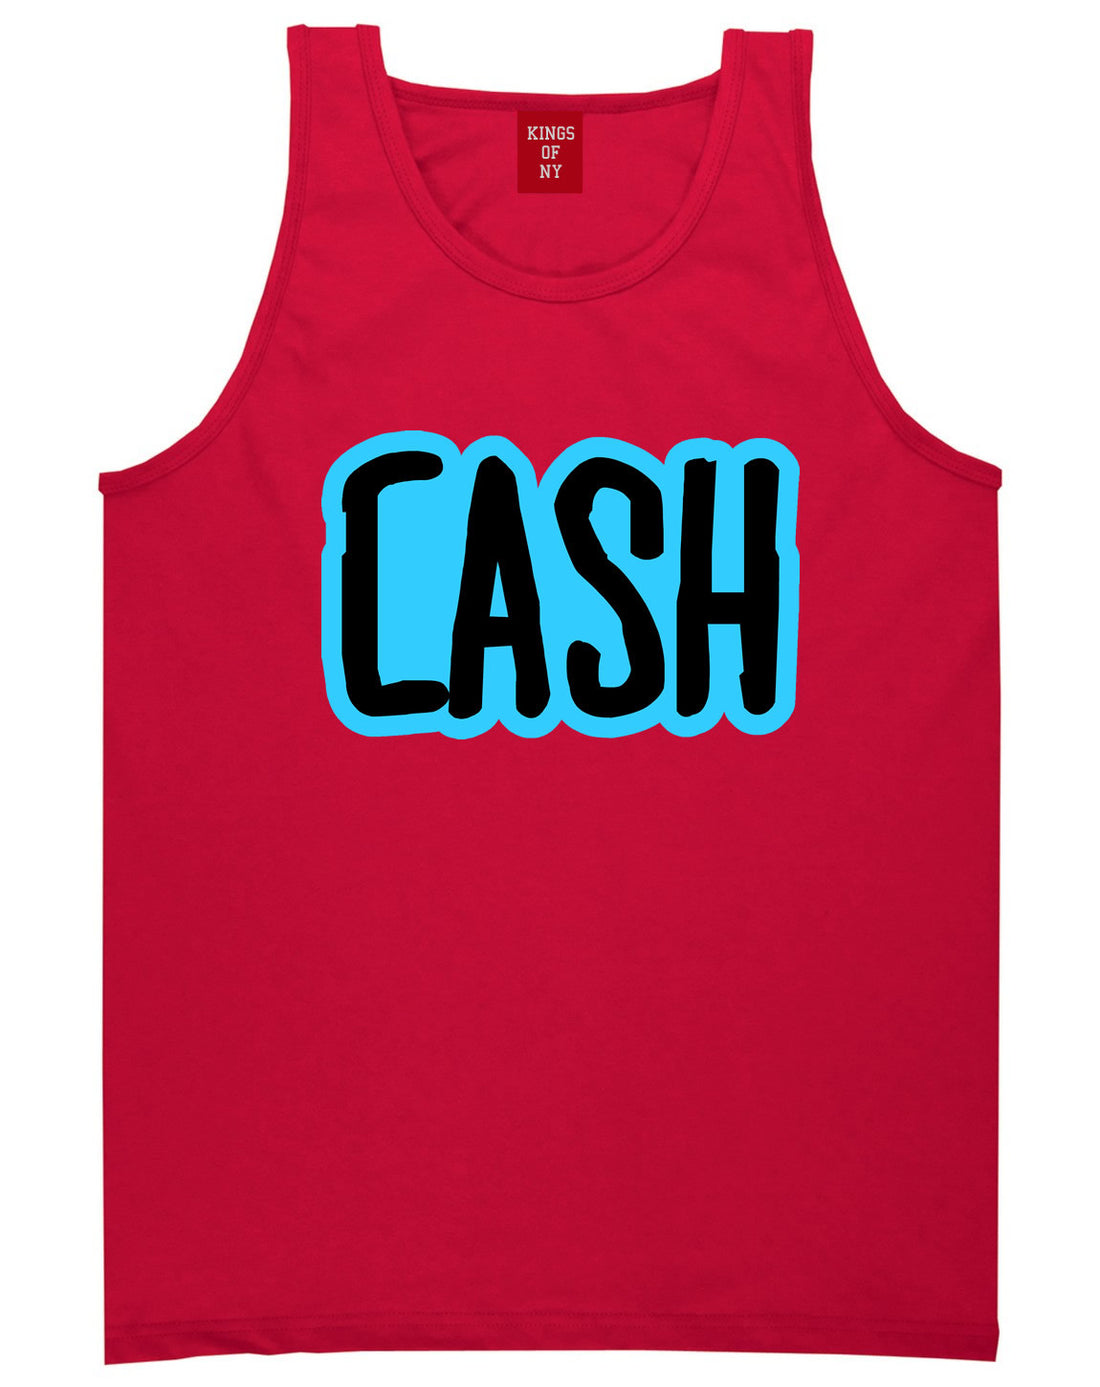 Cash Money Blue Lil Style Bird Wayne Man Tank Top In Red by Kings Of NY